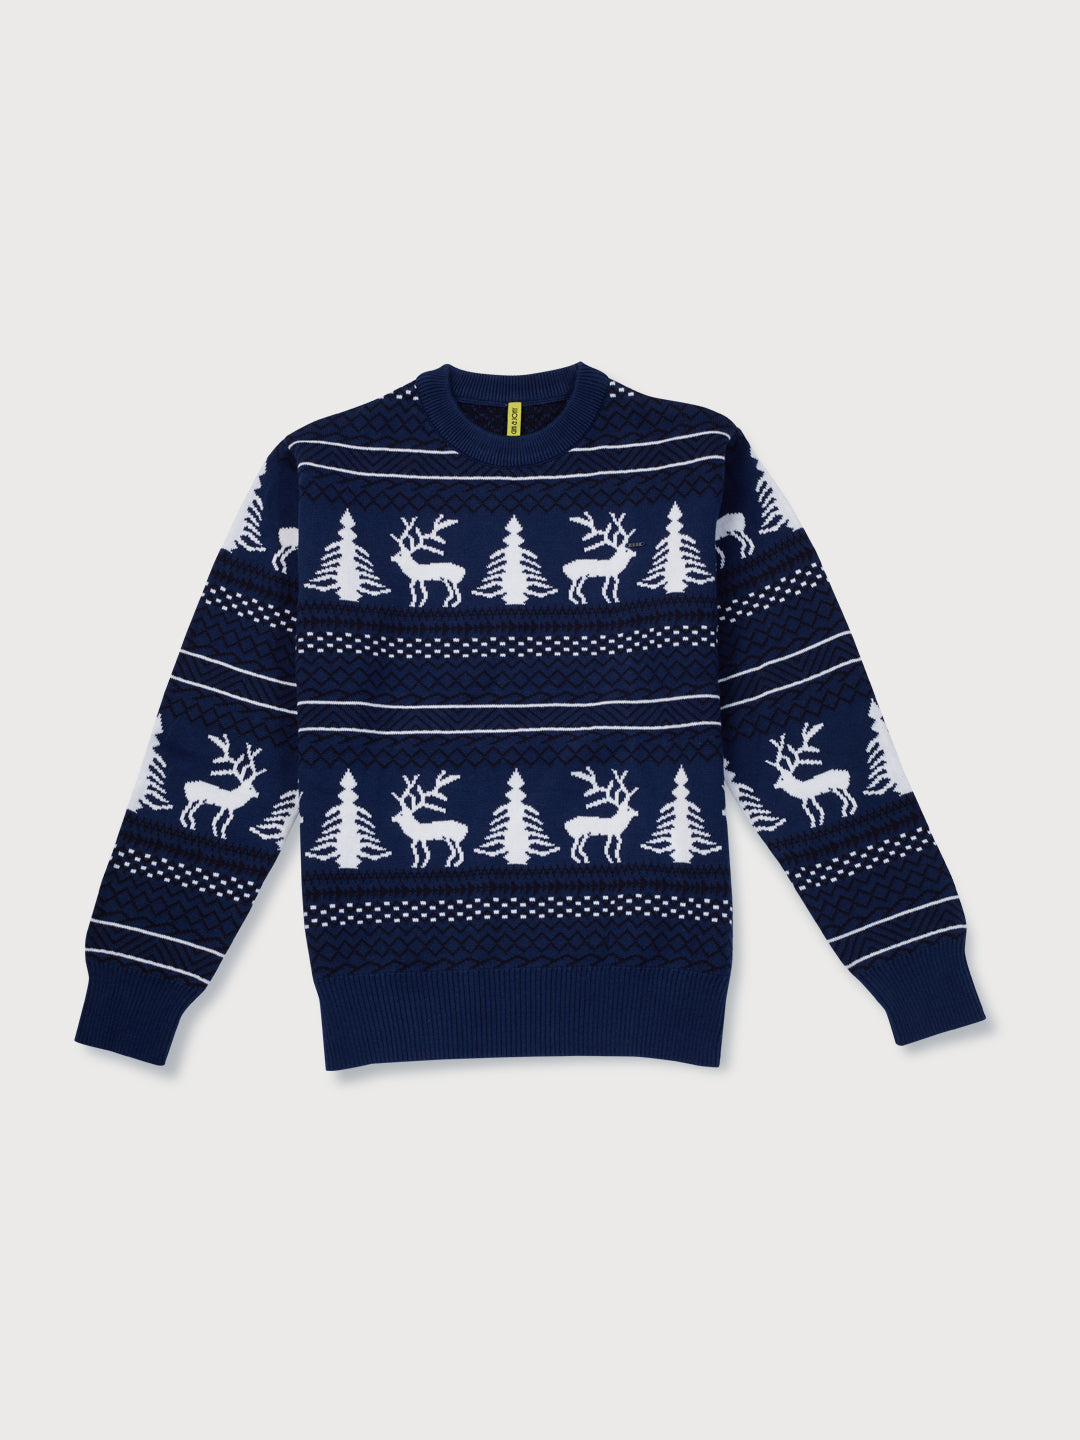 Boys Navy Blue Printed Woven Sweater